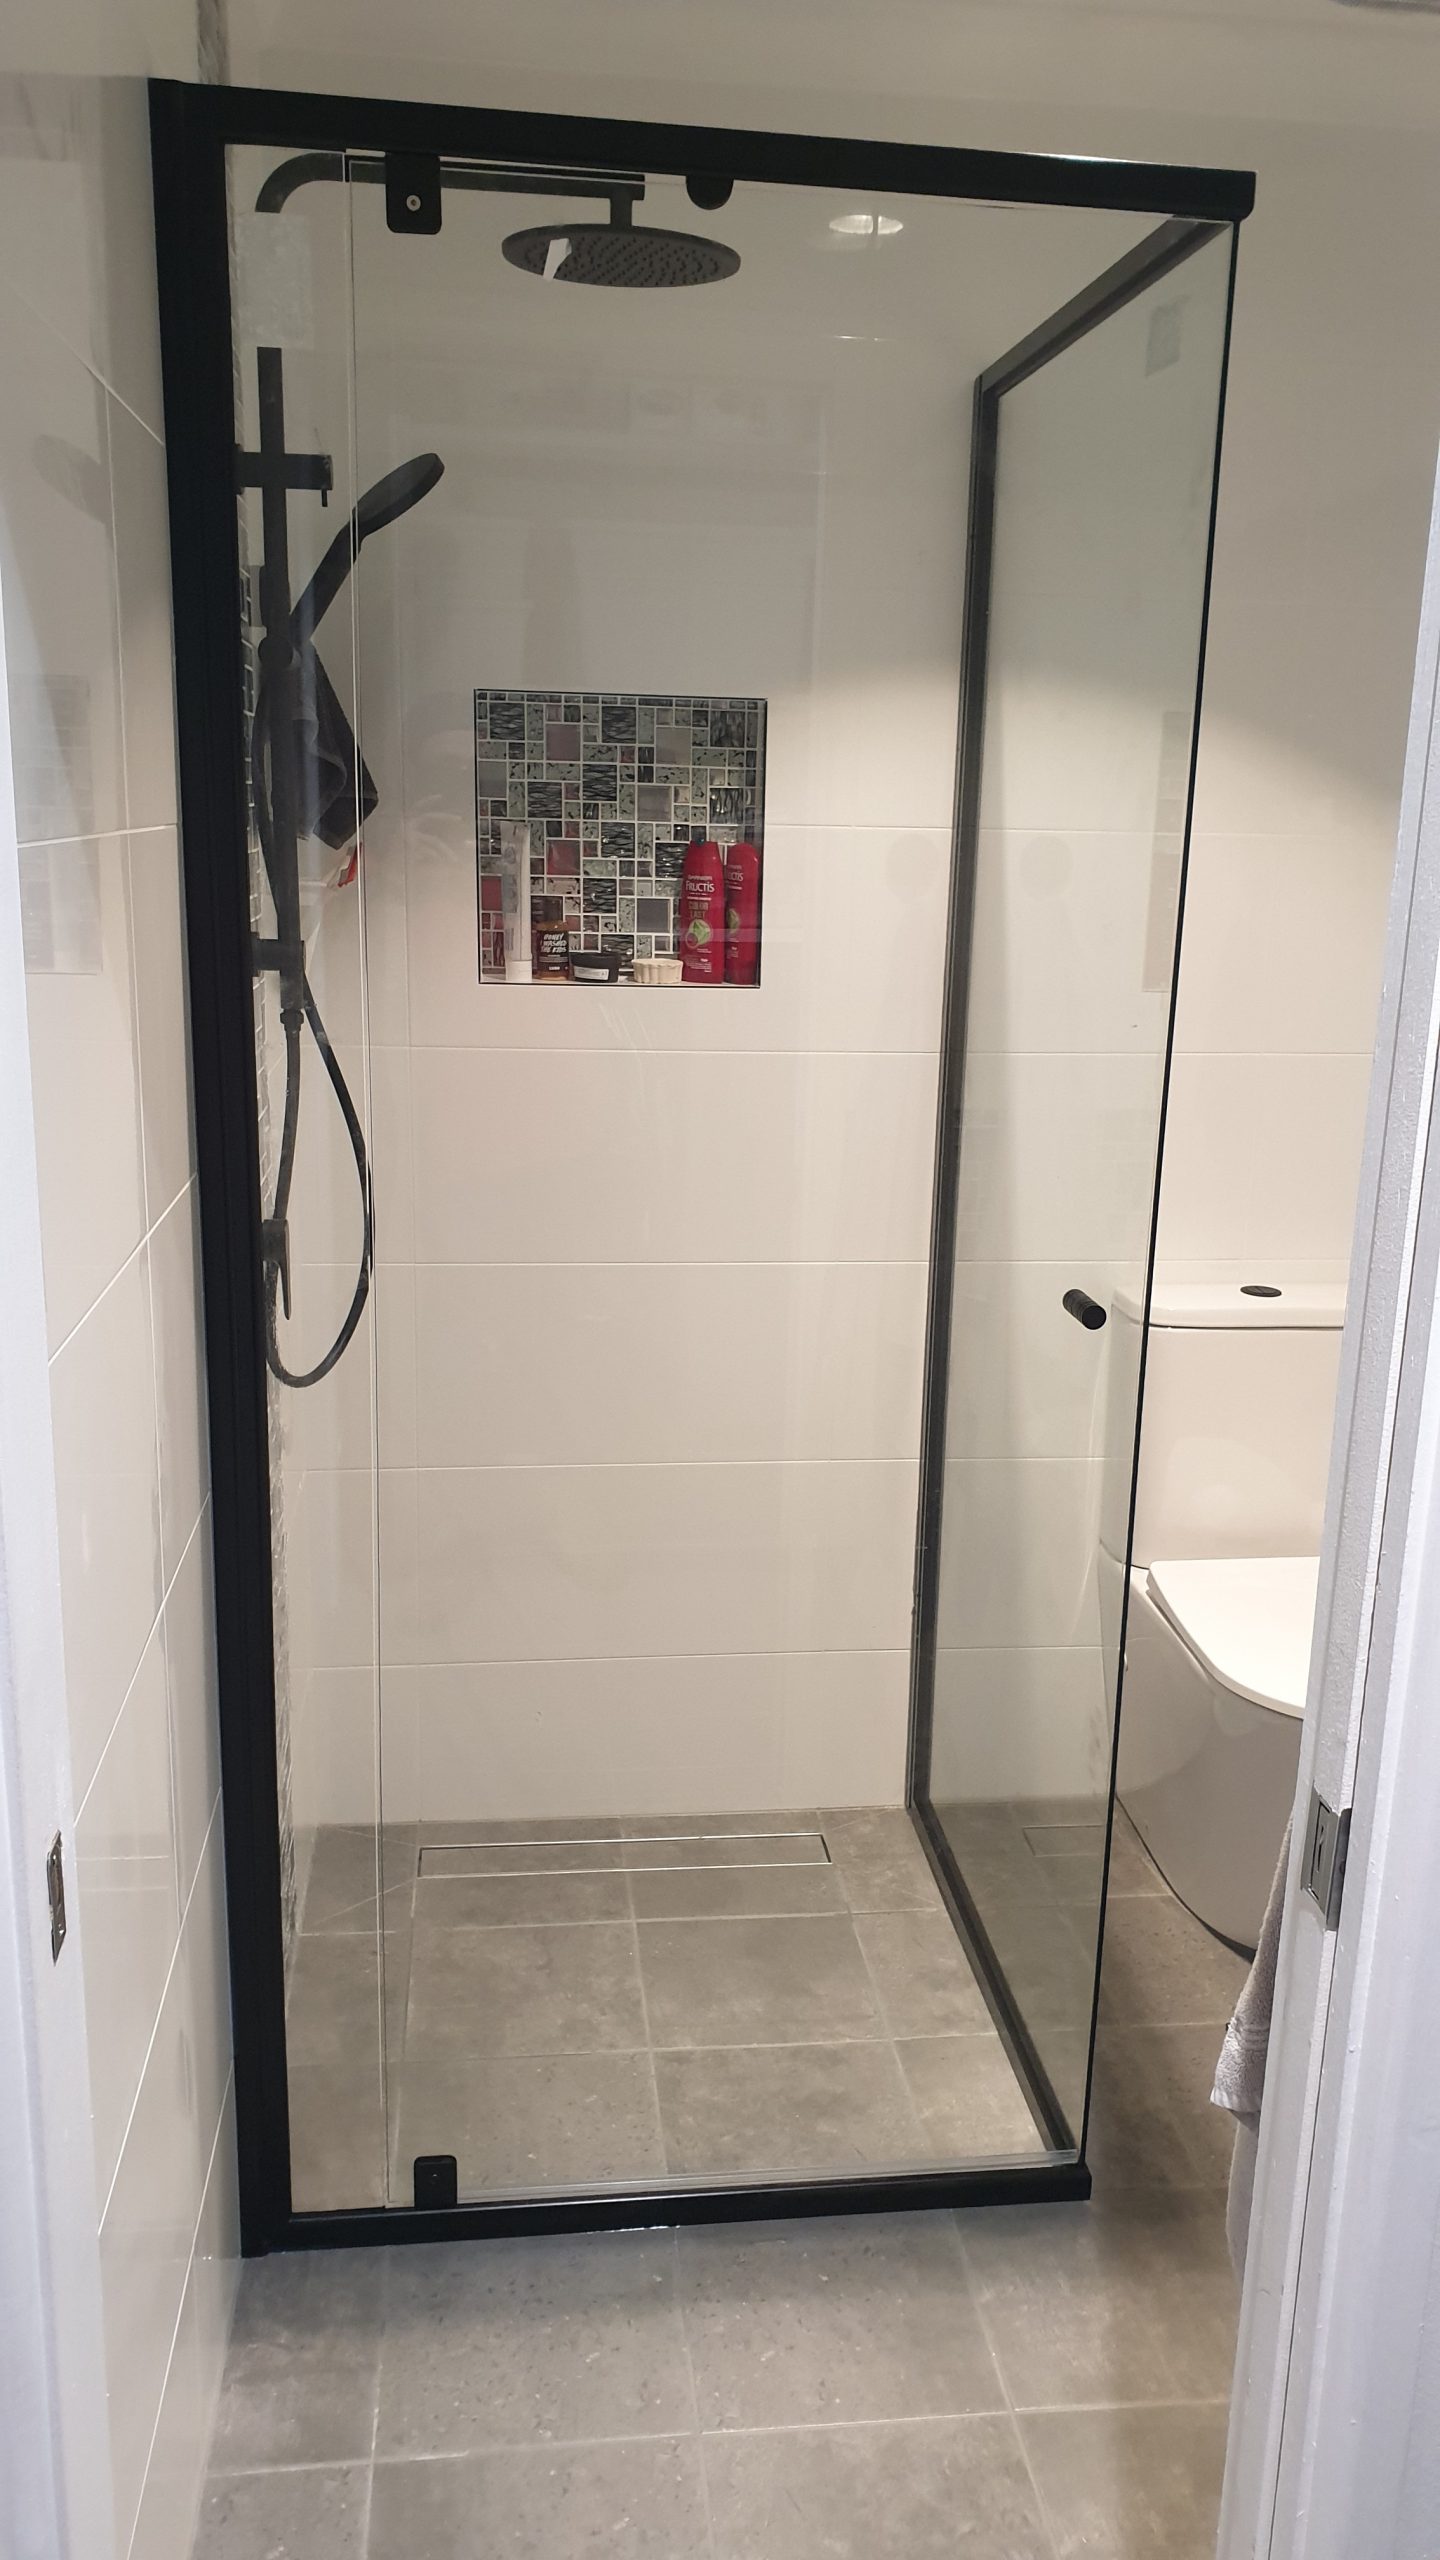 Read more about the article Semi-Frameless Shower Screen pros and cons